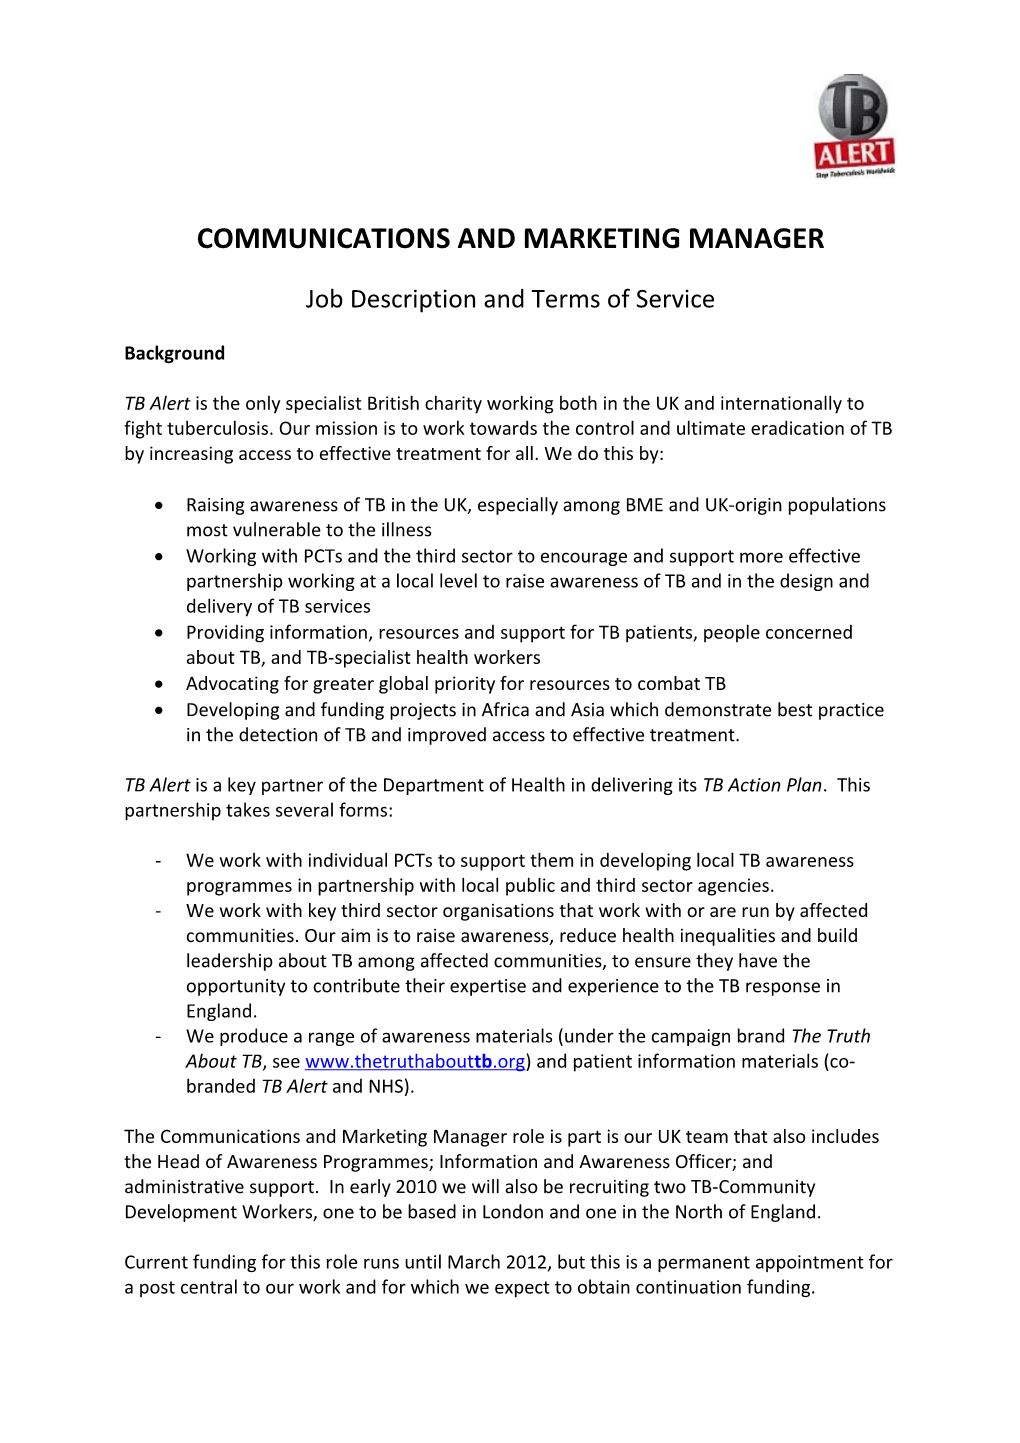 Communications and Marketing Manager